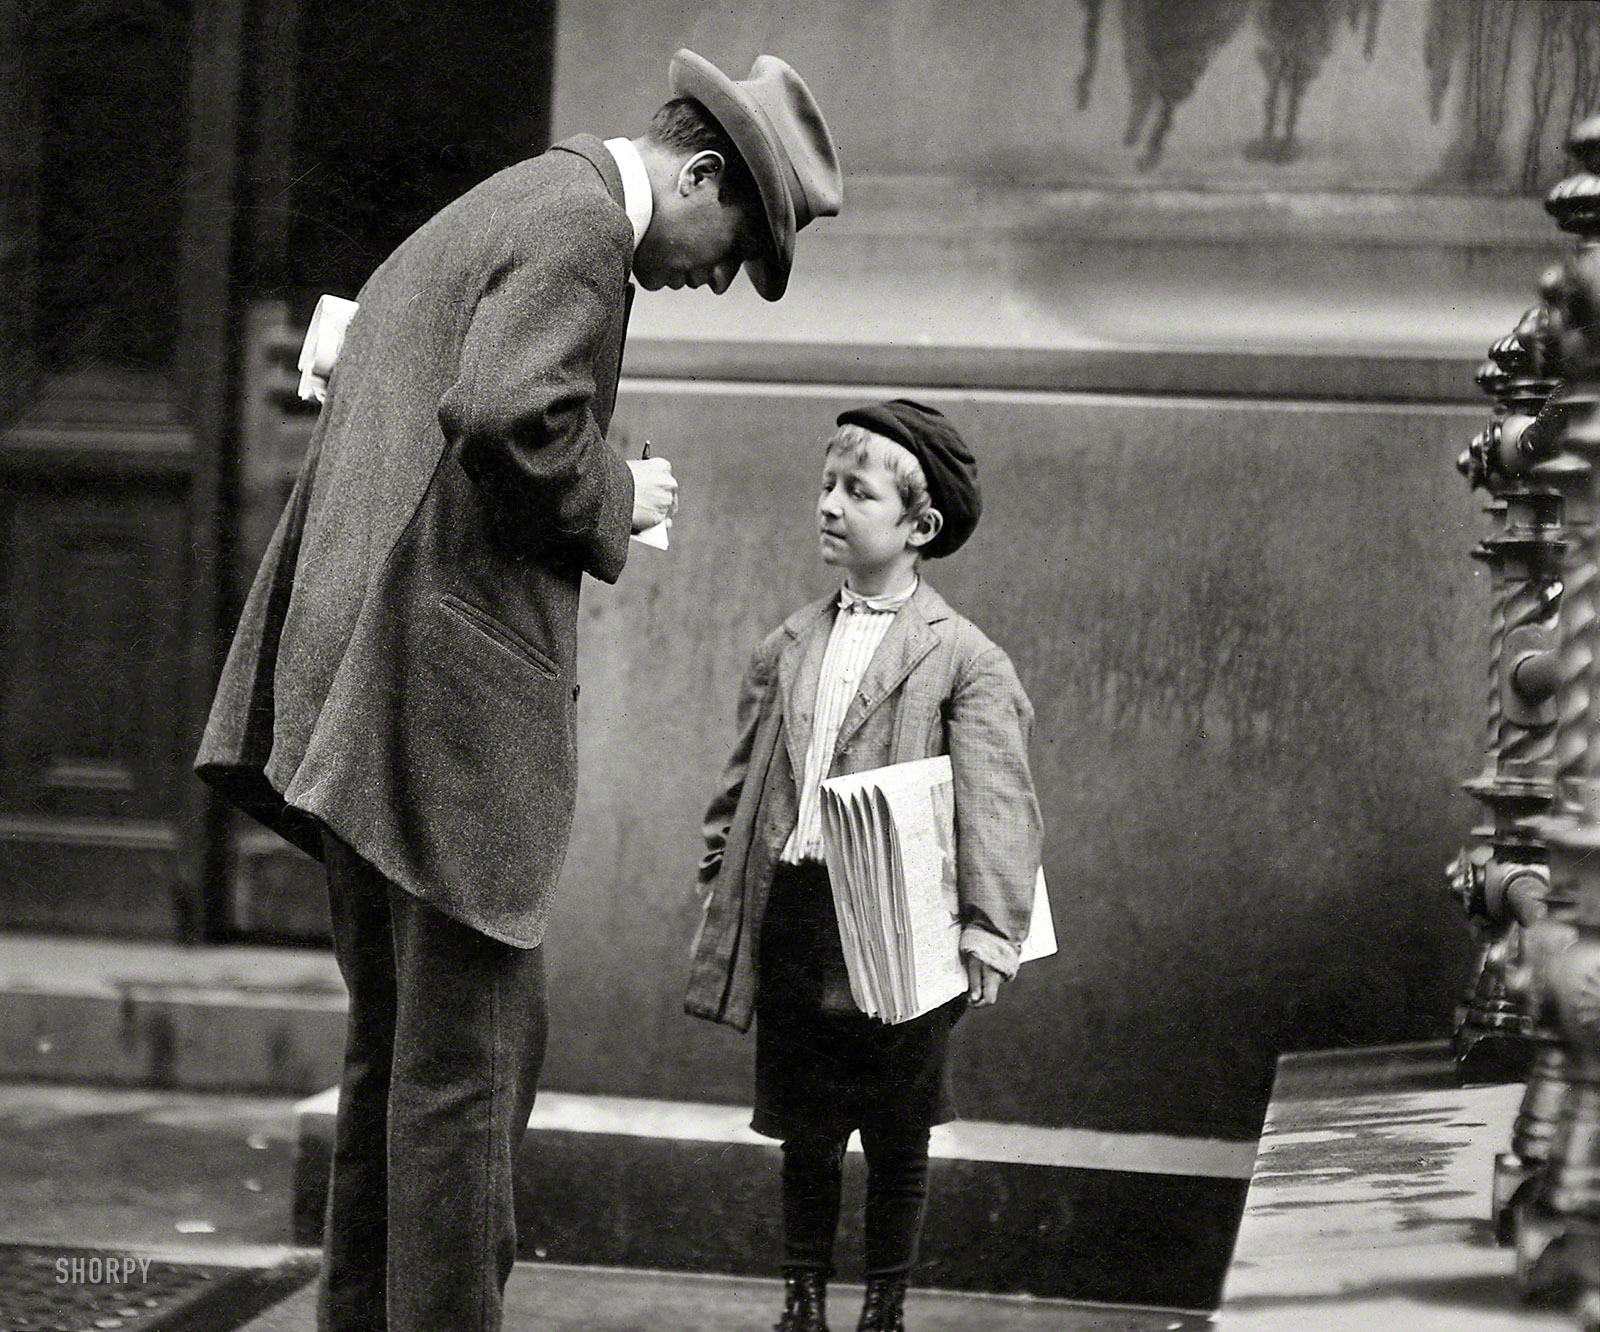 June 1910. Philadelphia, Pa. "Michael McNelis, 8 years old, a newsboy. This boy has just recovered from his second attack of pneumonia. Was found selling papers in a big rainstorm today." Photo by Lewis Wickes Hine. View full size.